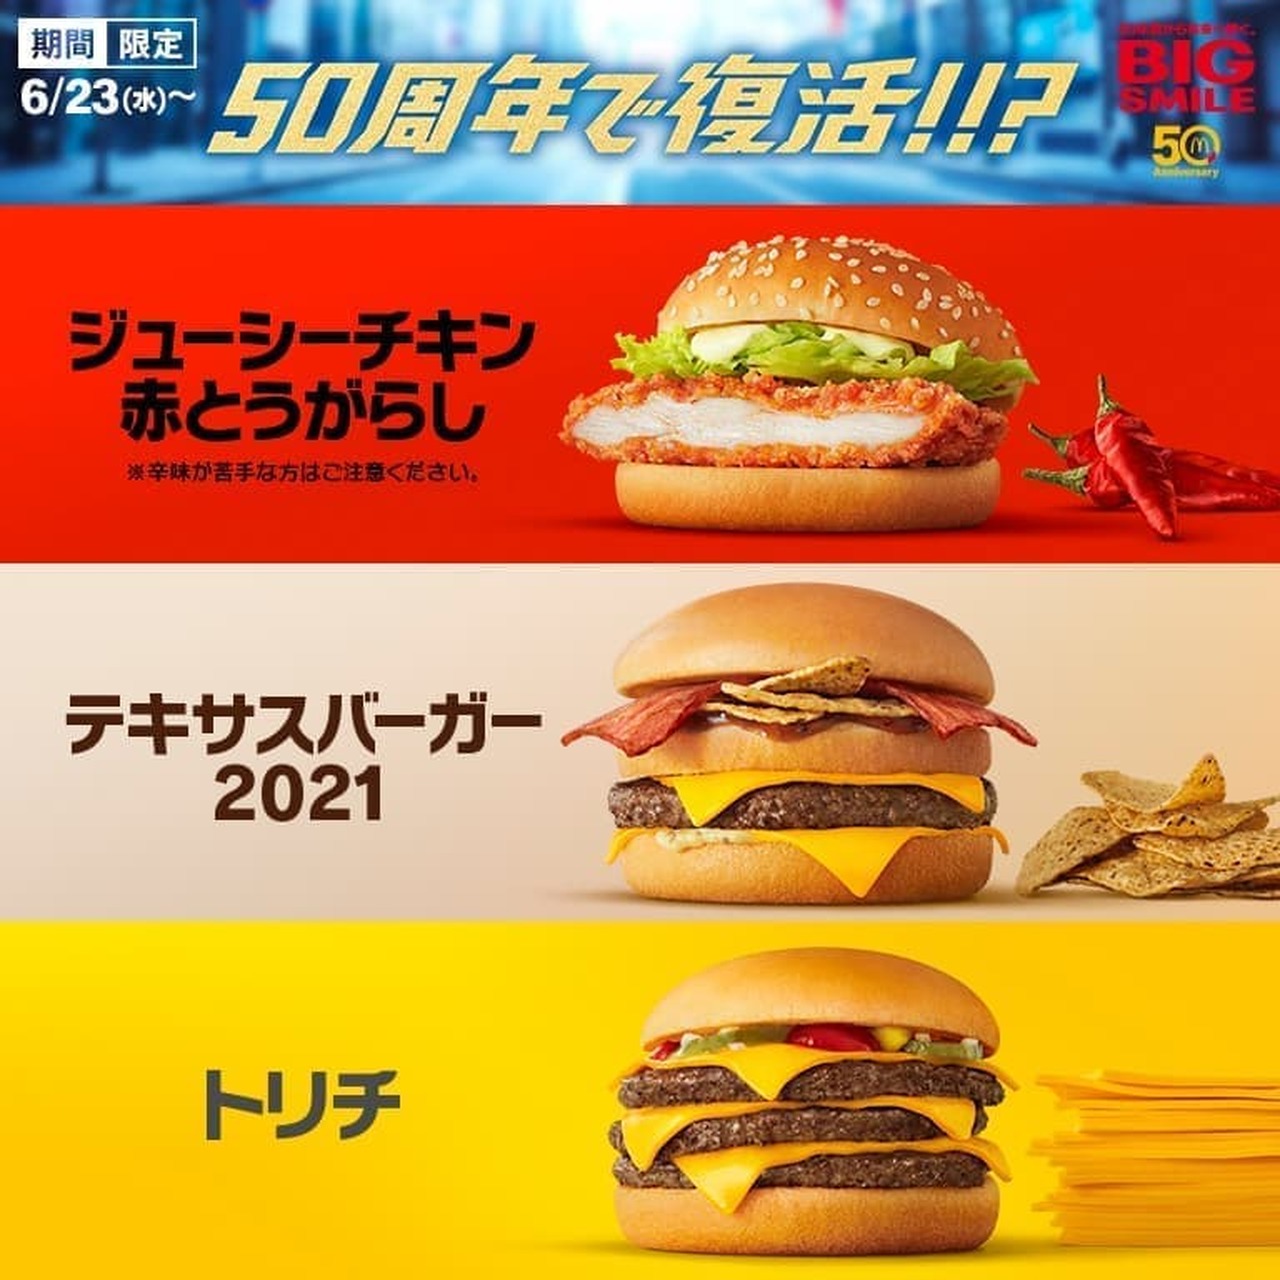 The first McDonald's 50th anniversary campaign